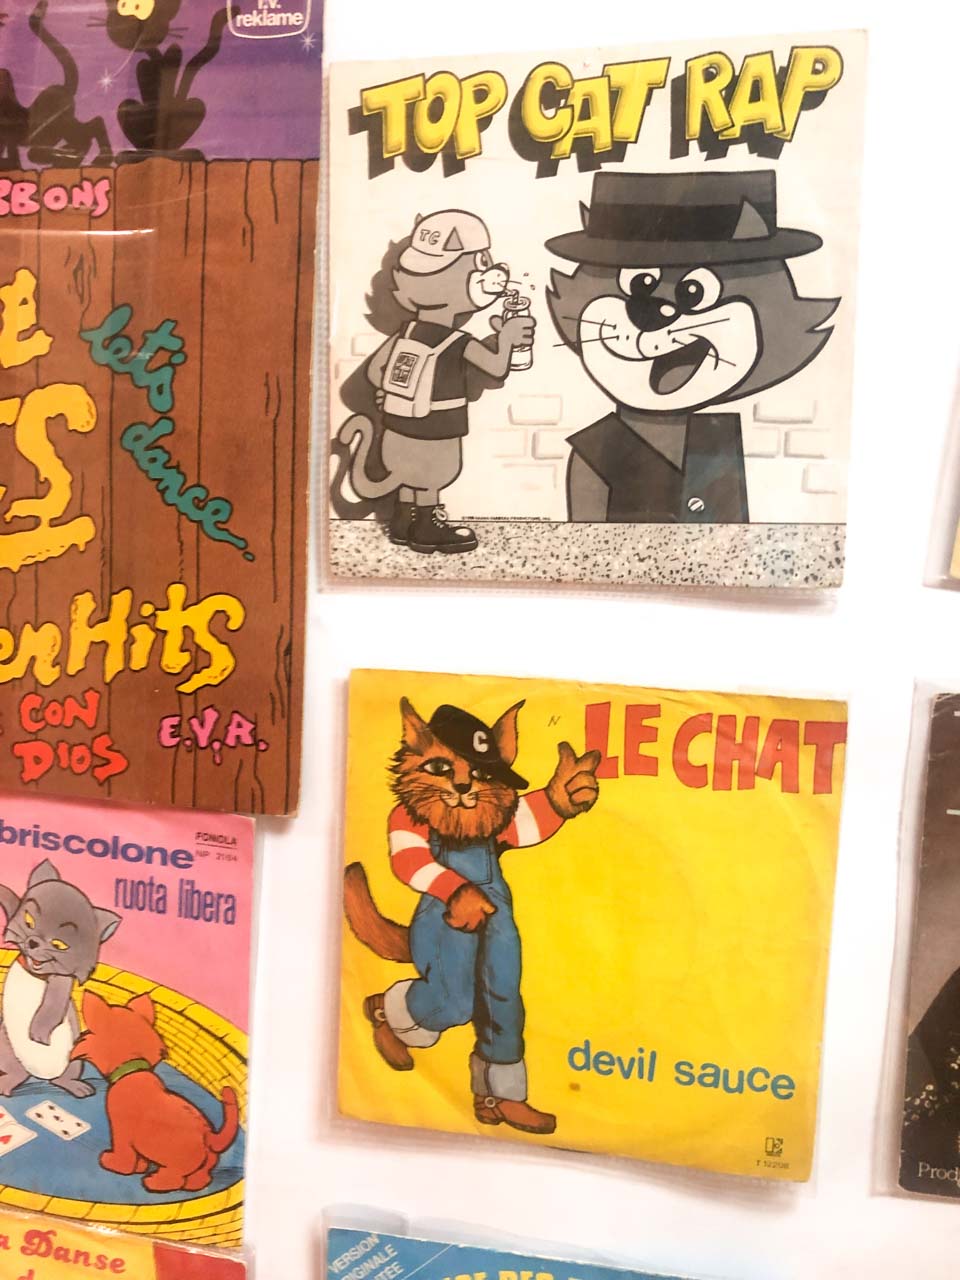 Vintage cat illustrations on display at the Cat Museum in Kotor, Montenegro